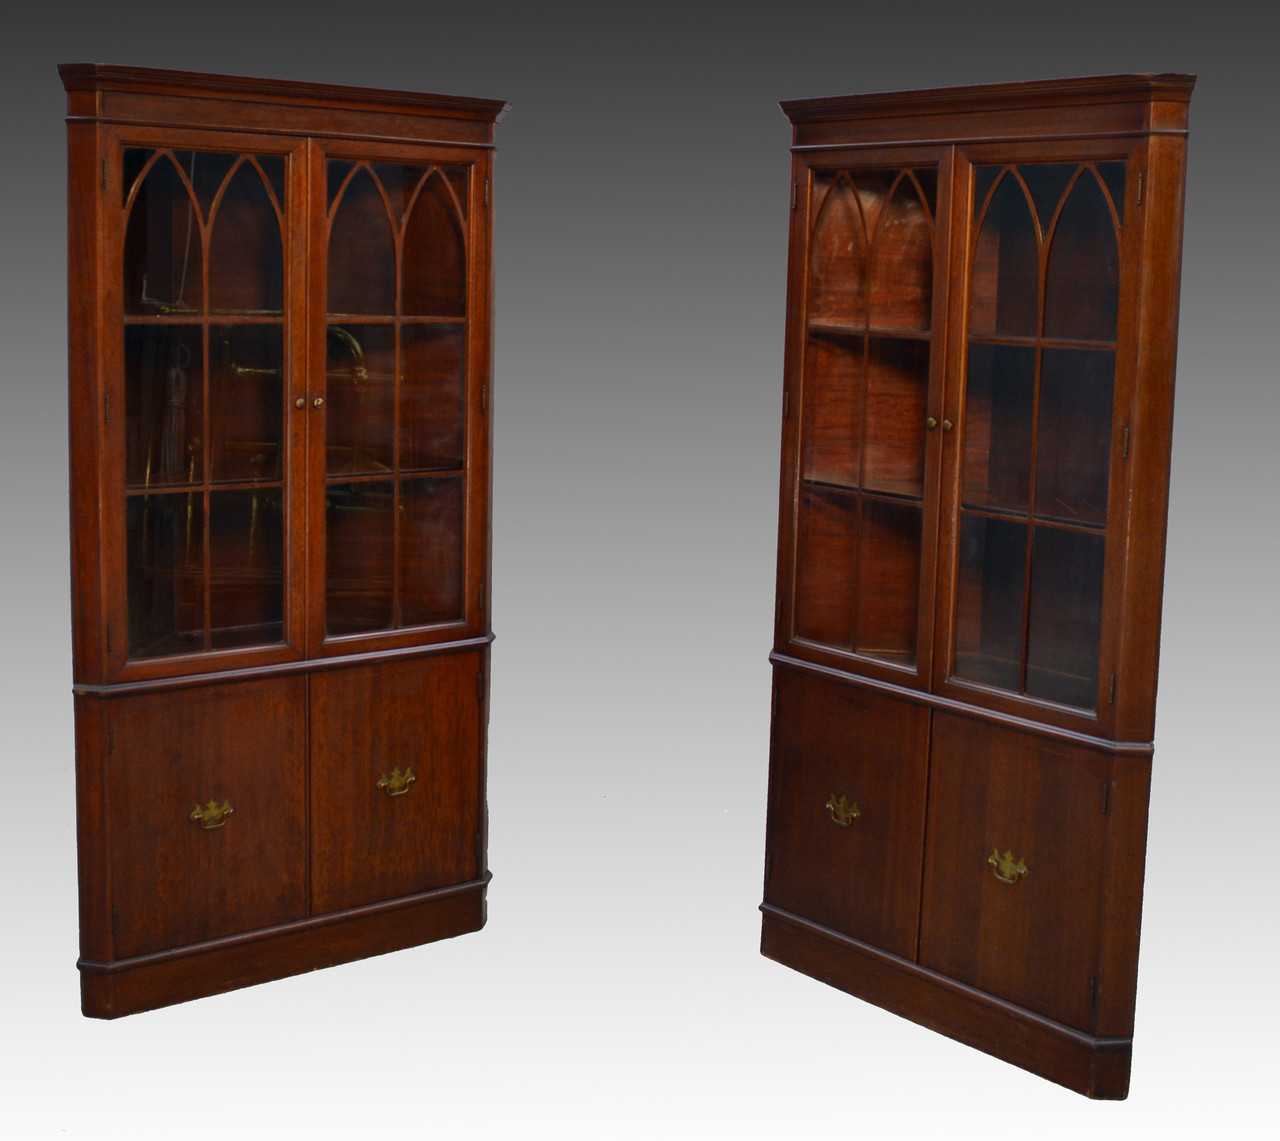 Sold Pair Of Mahogany Formal Duncan Phyfe Corner Cabinets Best